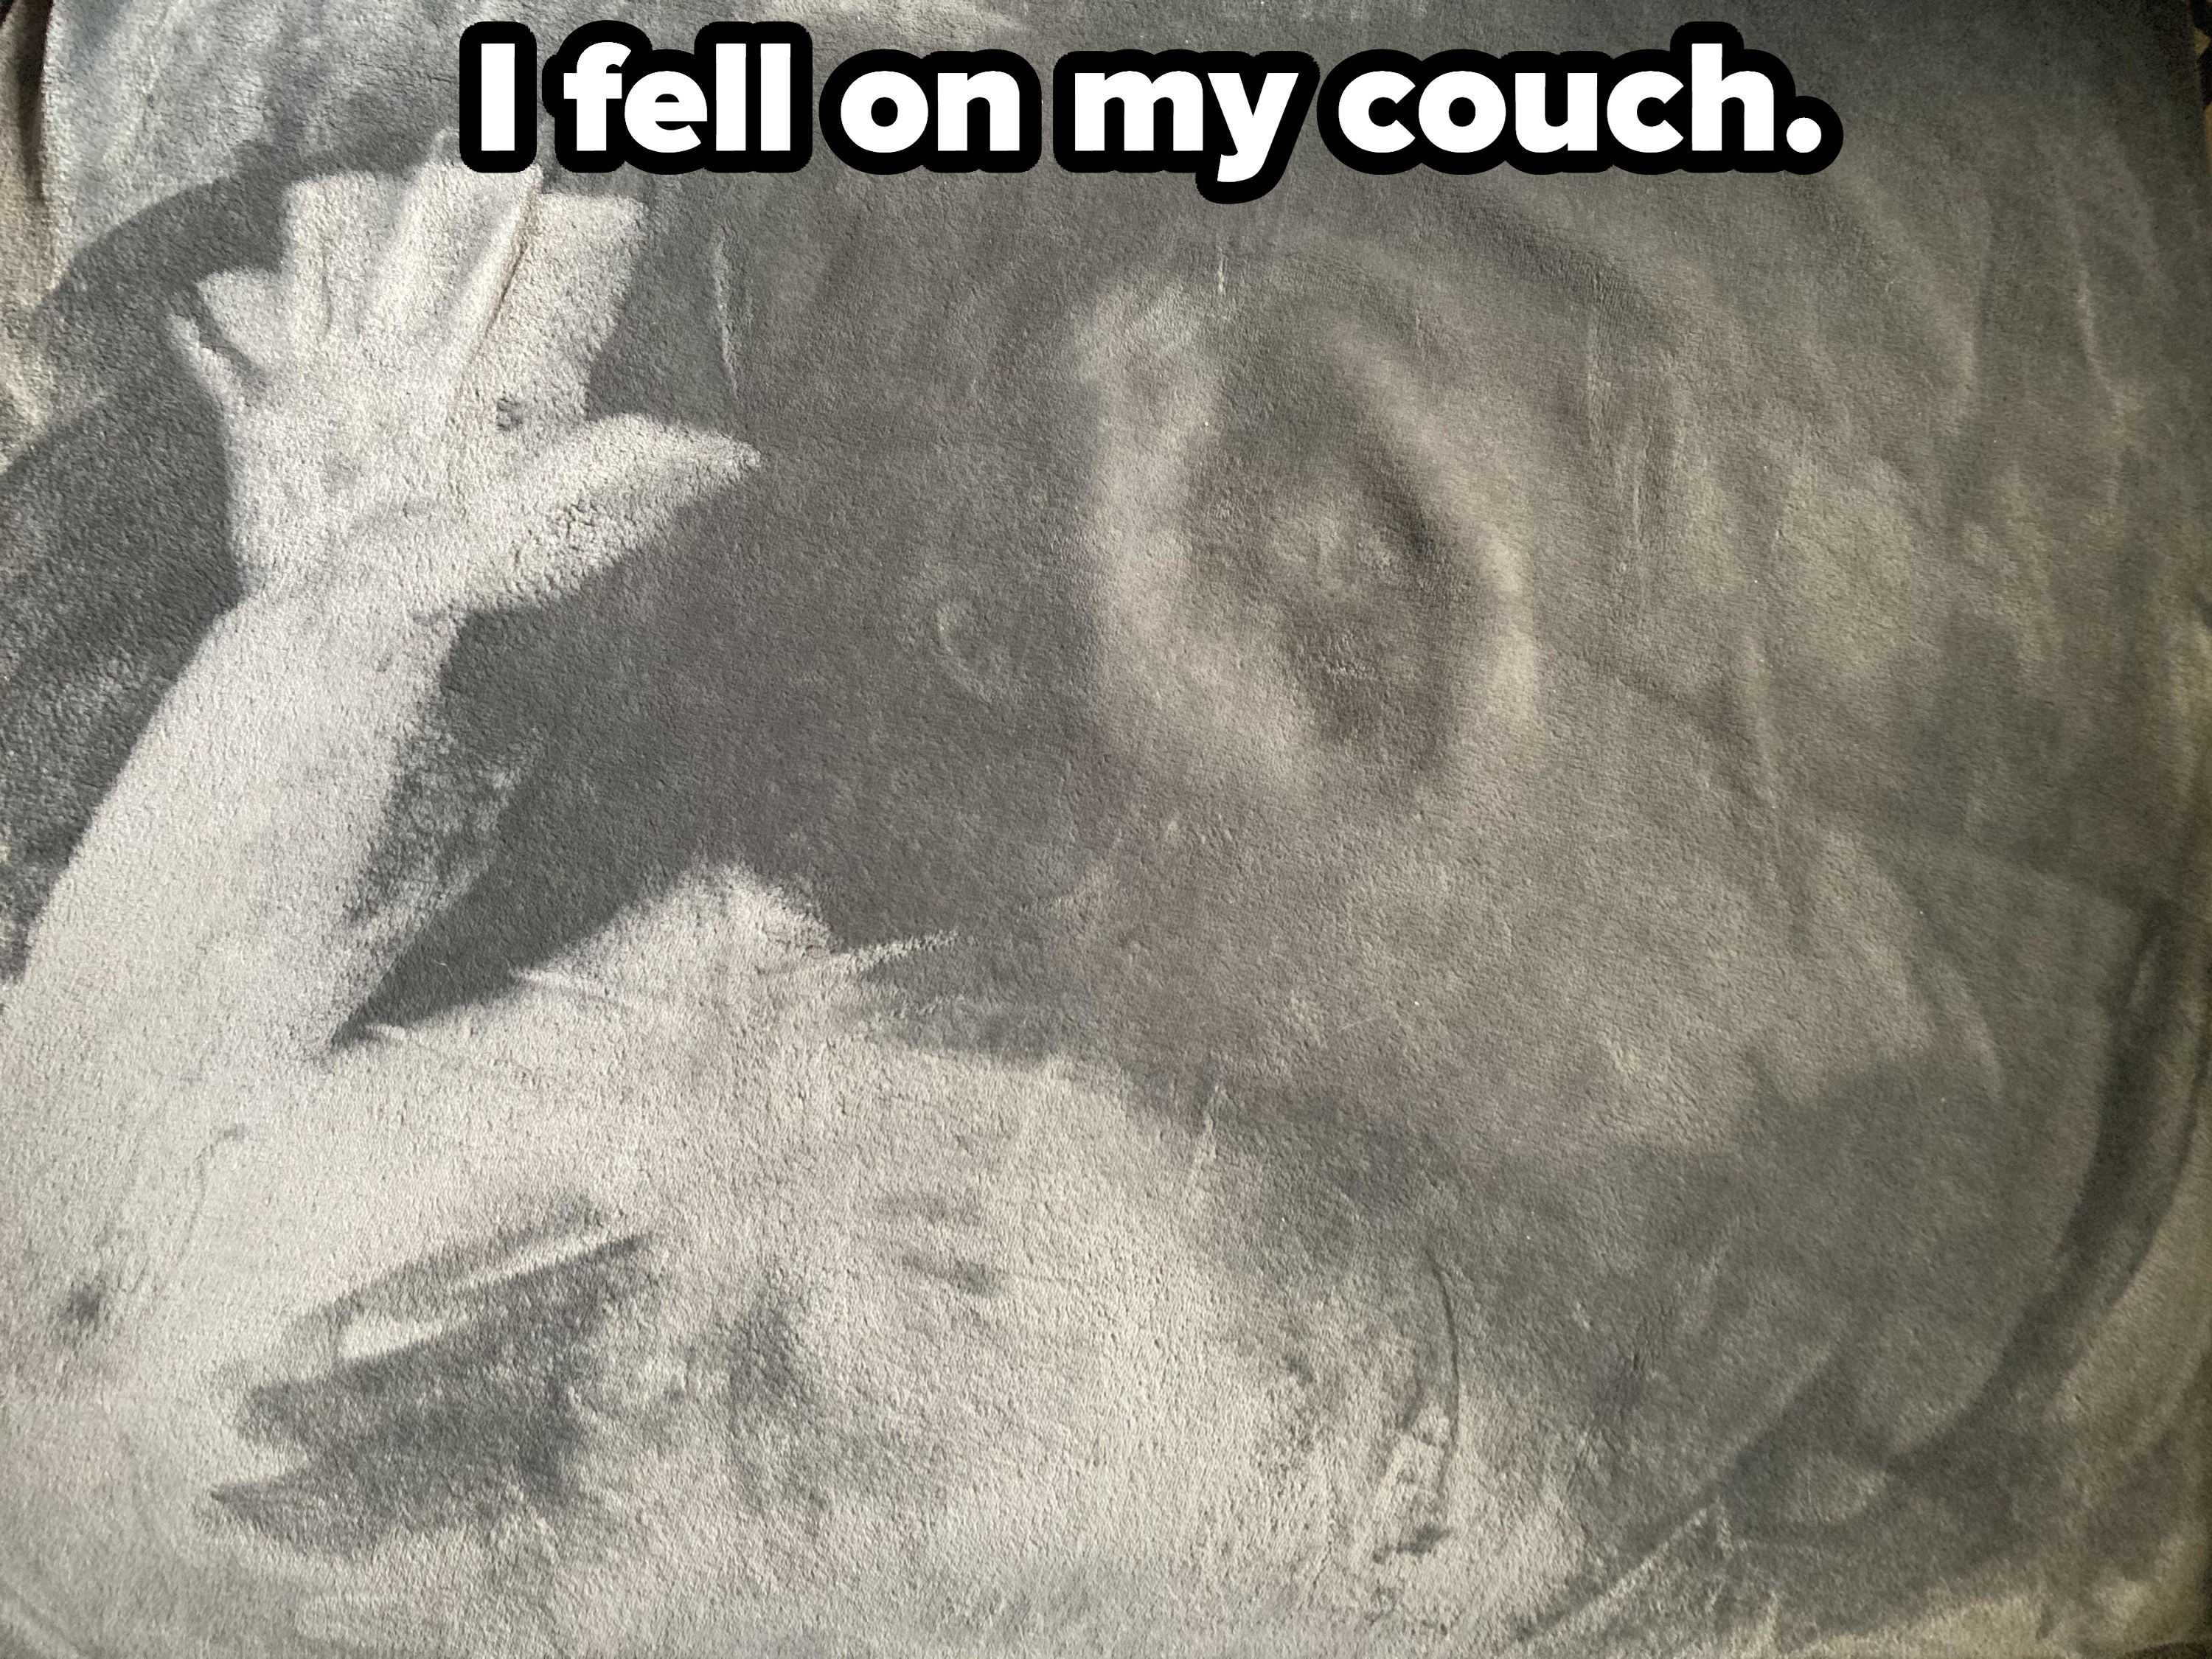 A person&#x27;s hand and face imprinted on a couch